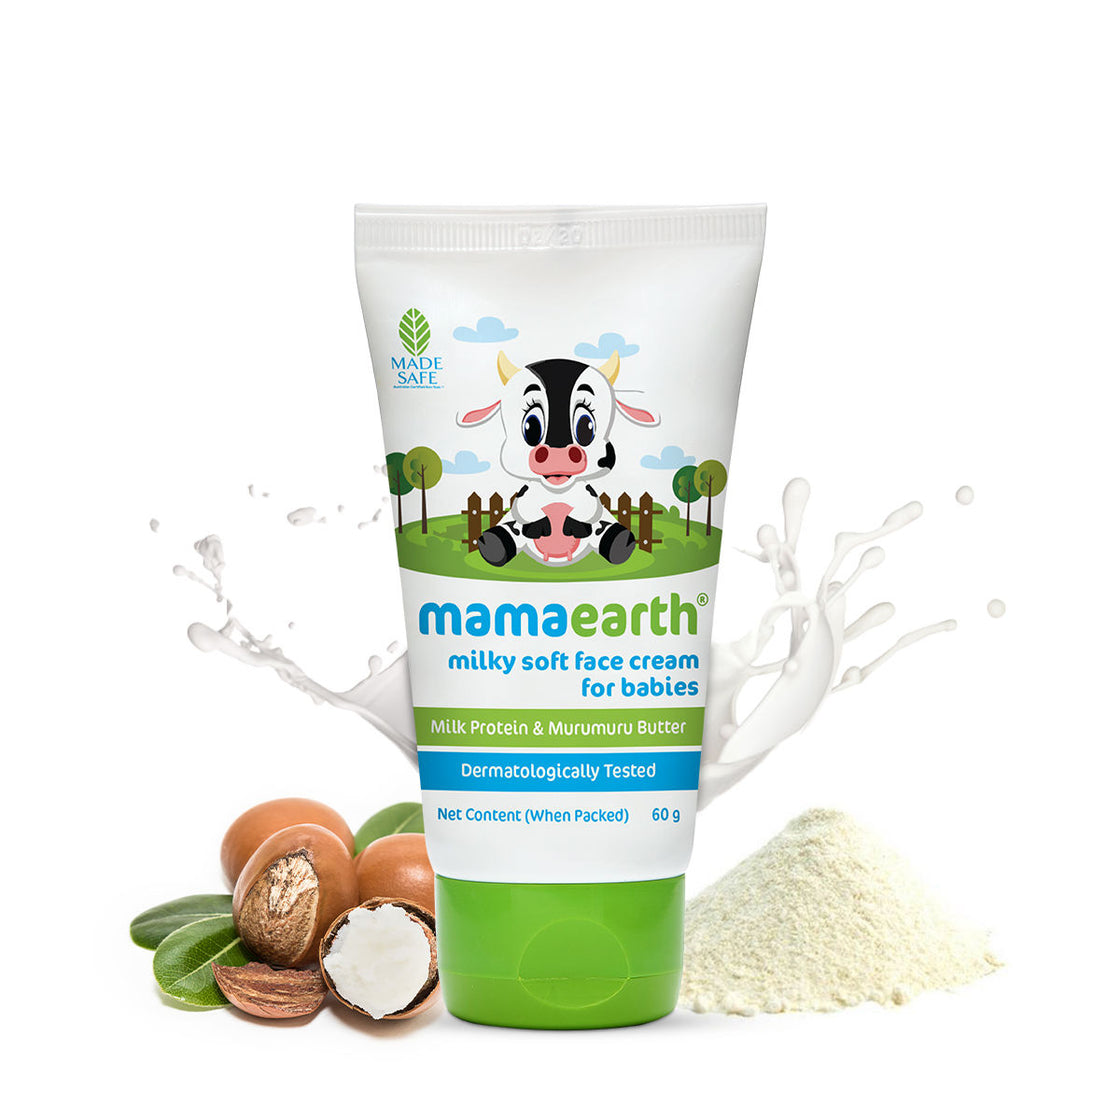 Mamaearth Milky Soft Face Cream For Babies With Milk Protein Murumuru Butter-8